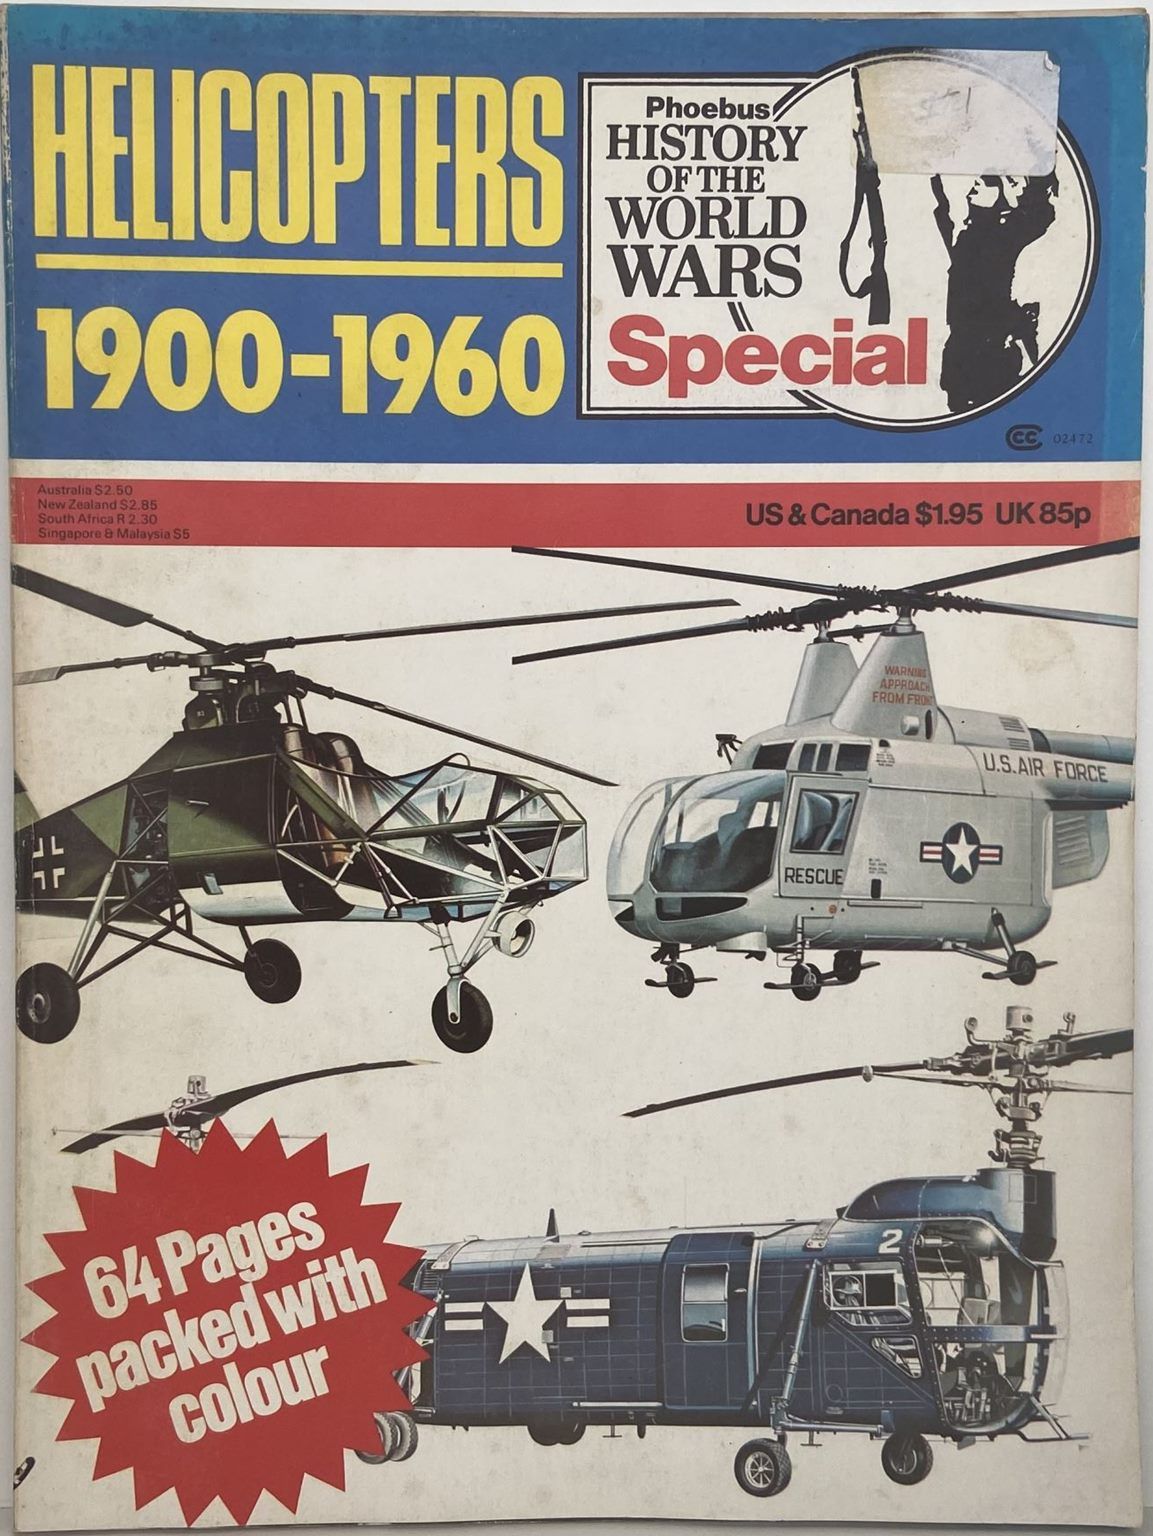 HELICOPTERS 1900 - 1960